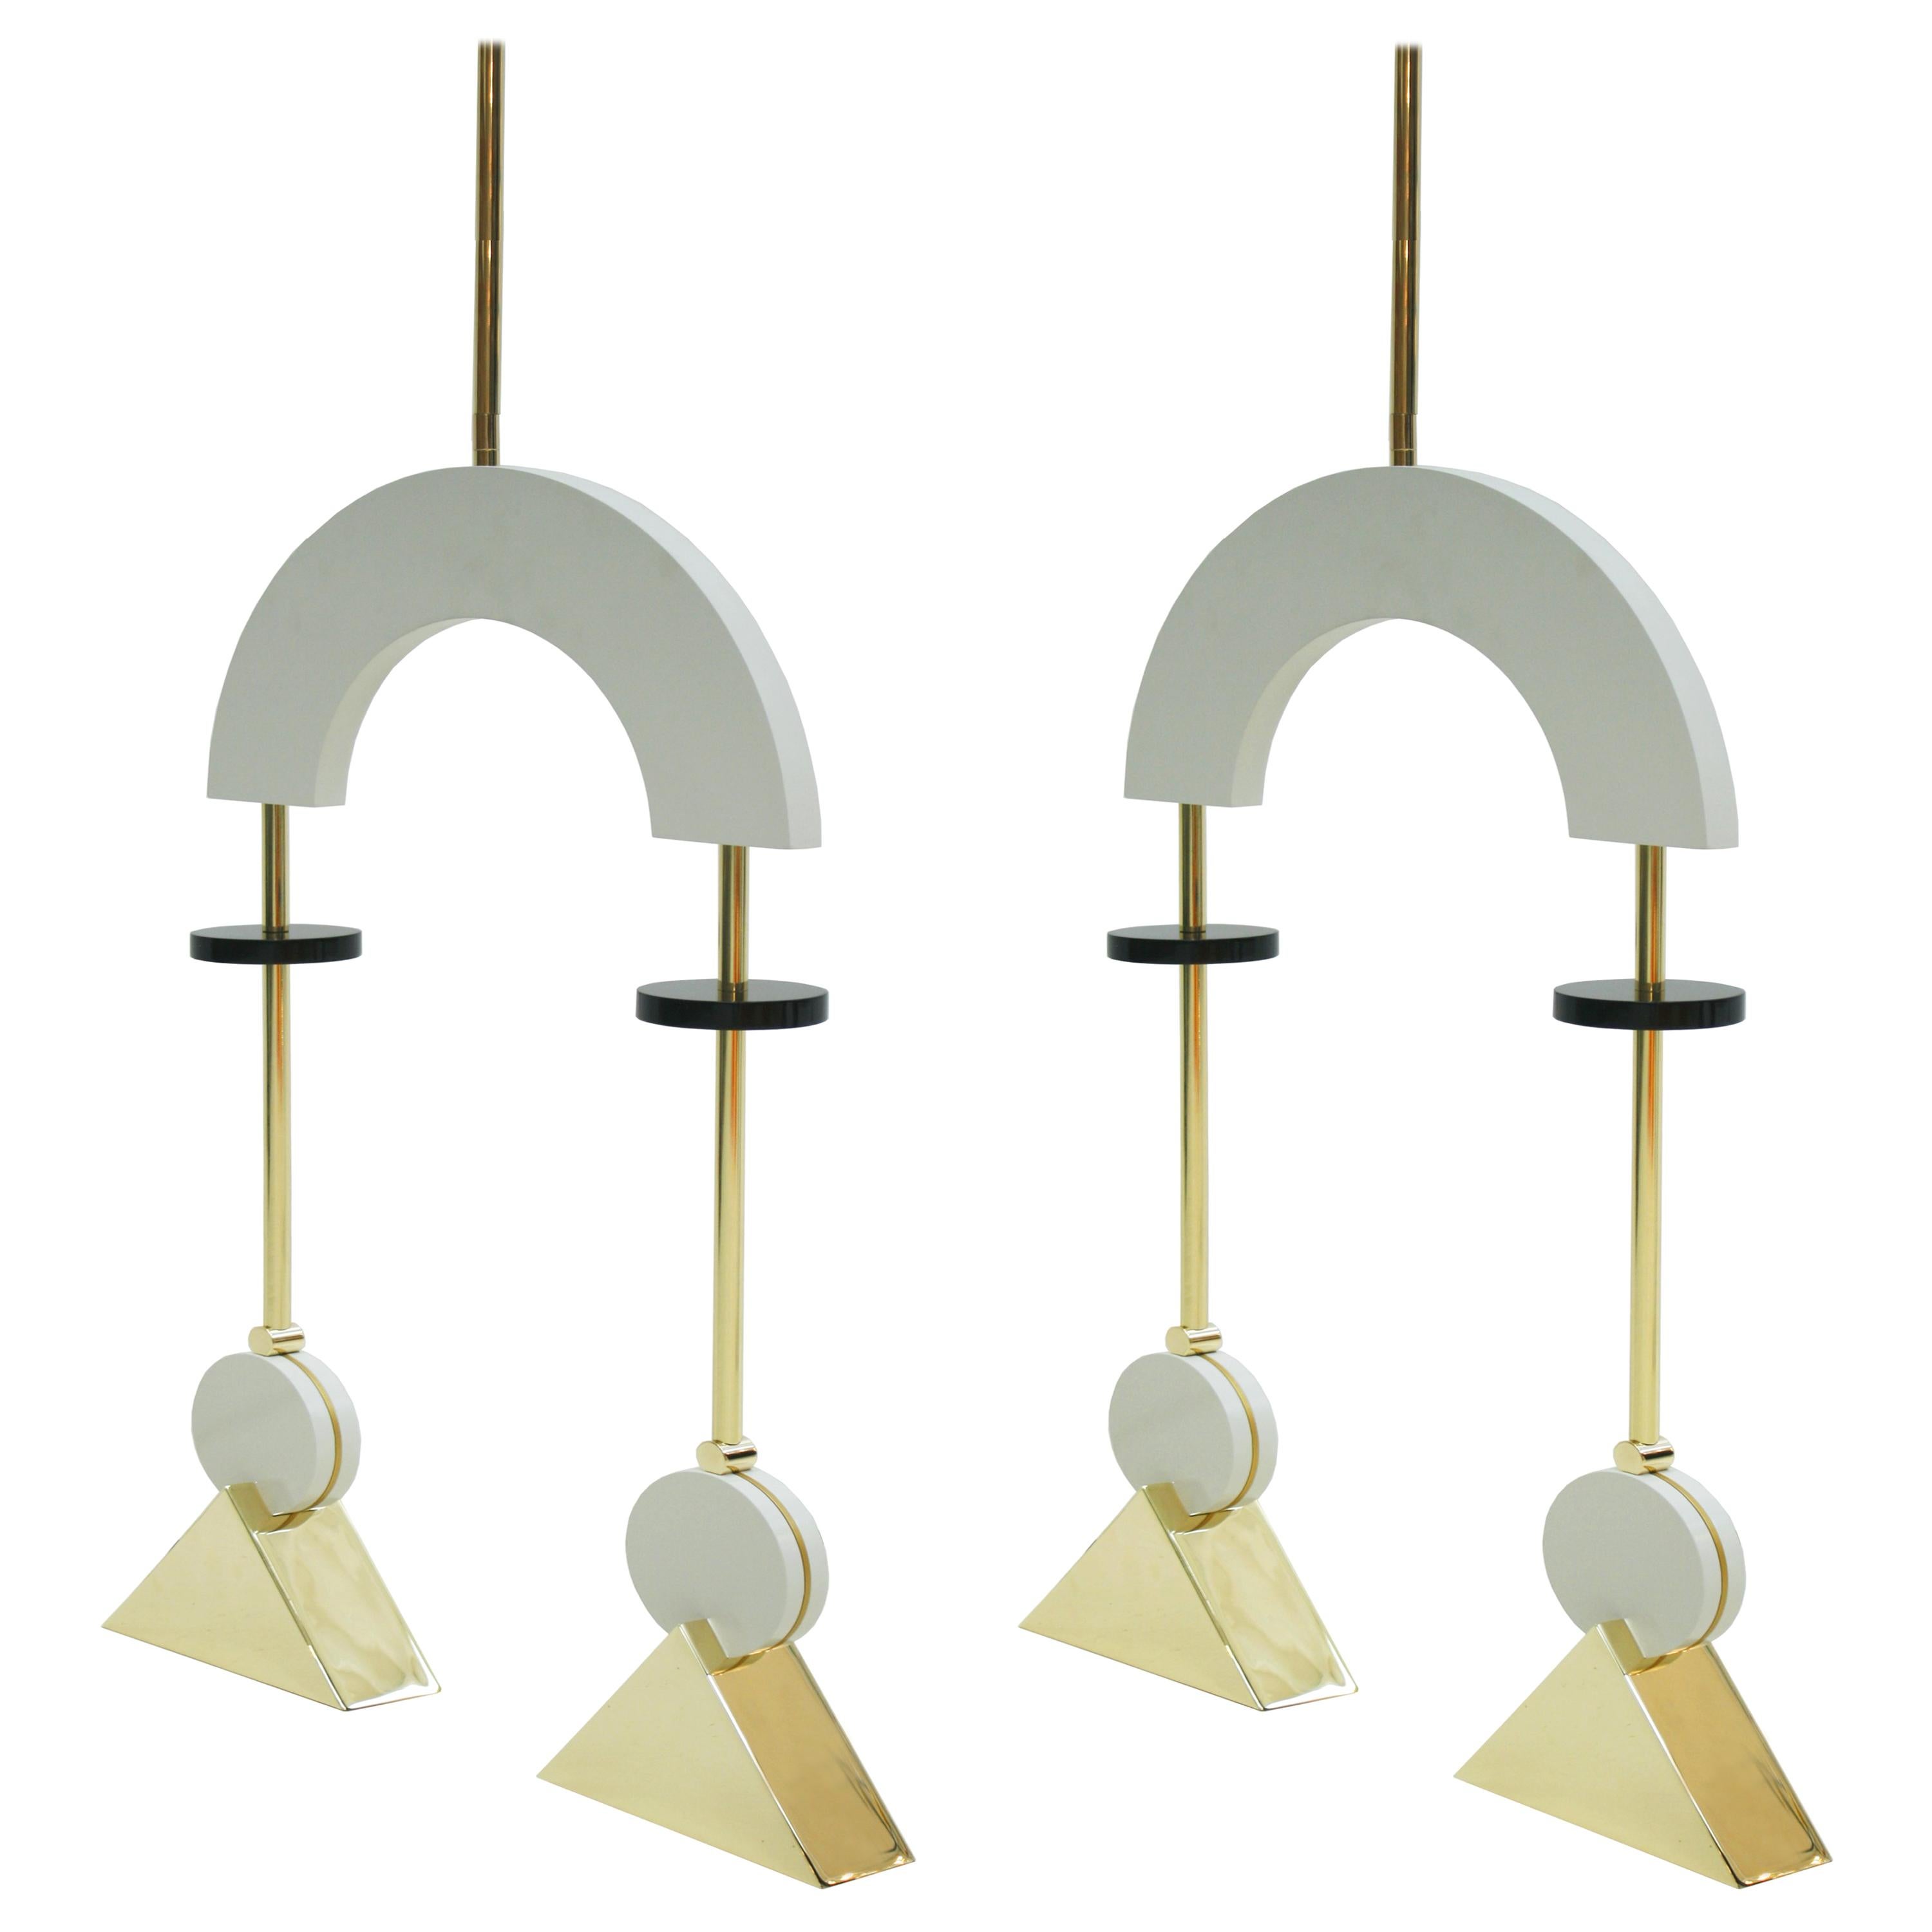 Pendant lamps composed of two points of light. Made of gold-plated bronze structure with white and black lacquered wood pieces. The design of this item was Inspired by the radical geometry of Constructivist art. The pendant lamp is constructed from